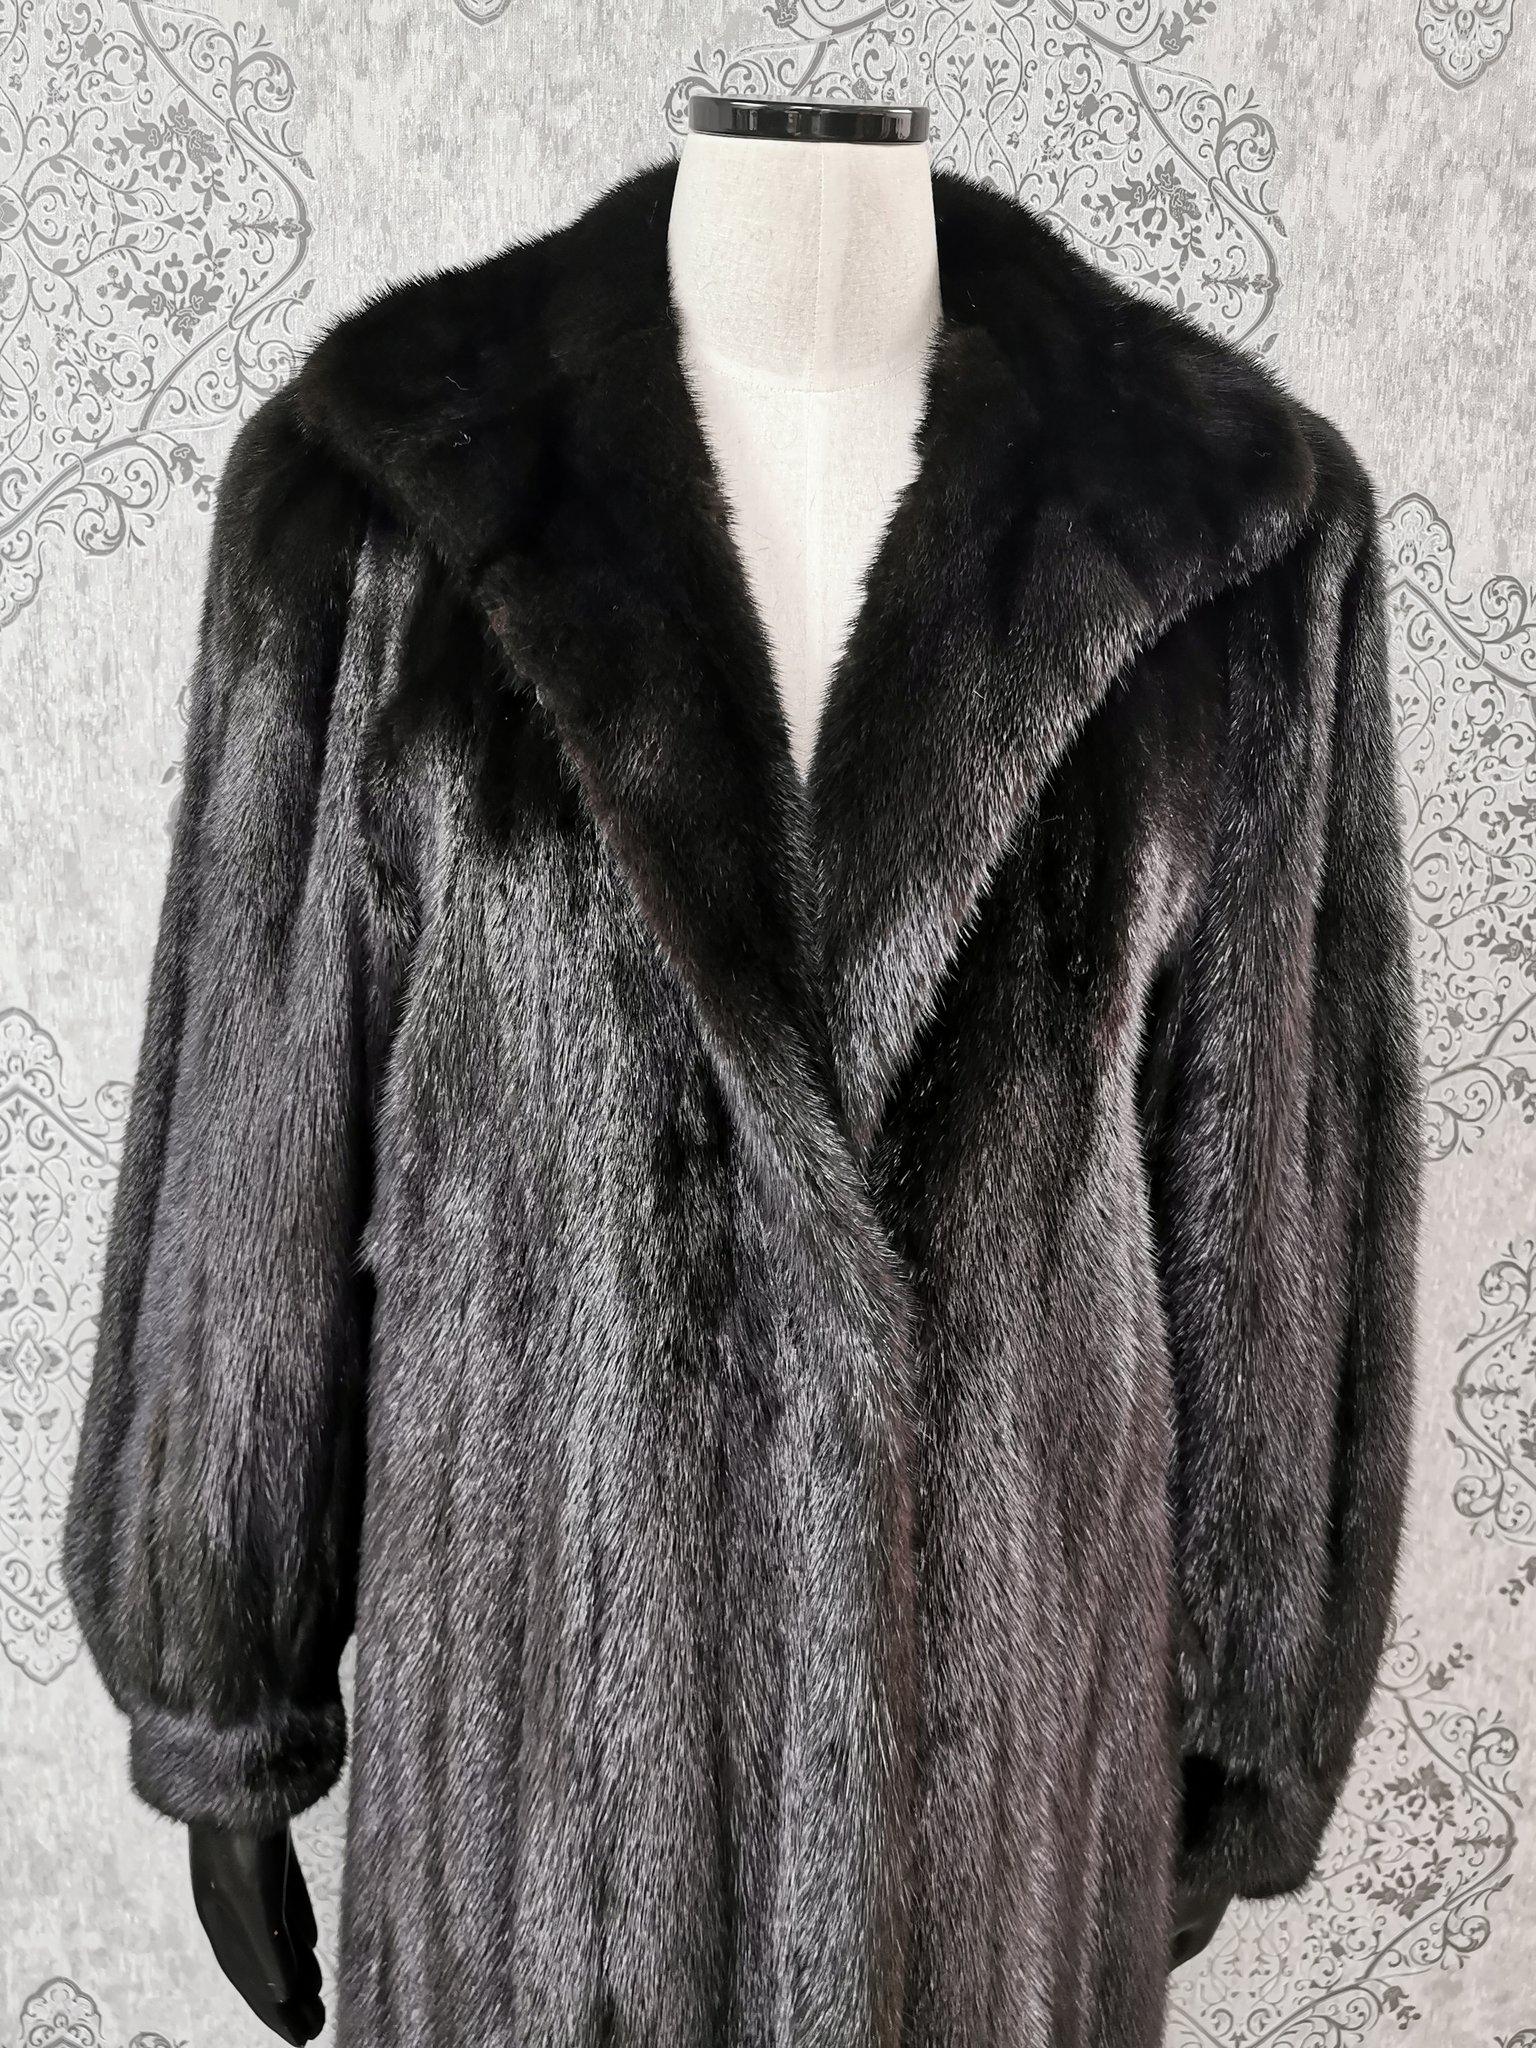 PRODUCT DESCRIPTION:

Brand new luxurious Mink fur coat 

Condition: Brand New

Closure: Buttons

Color: Black

Material: Mink

Garment type: Coat

Sleeves: Princess cuffs

Pockets: No pockets

Collar: Portrait

Lining: Shirred Silk satin

Made in